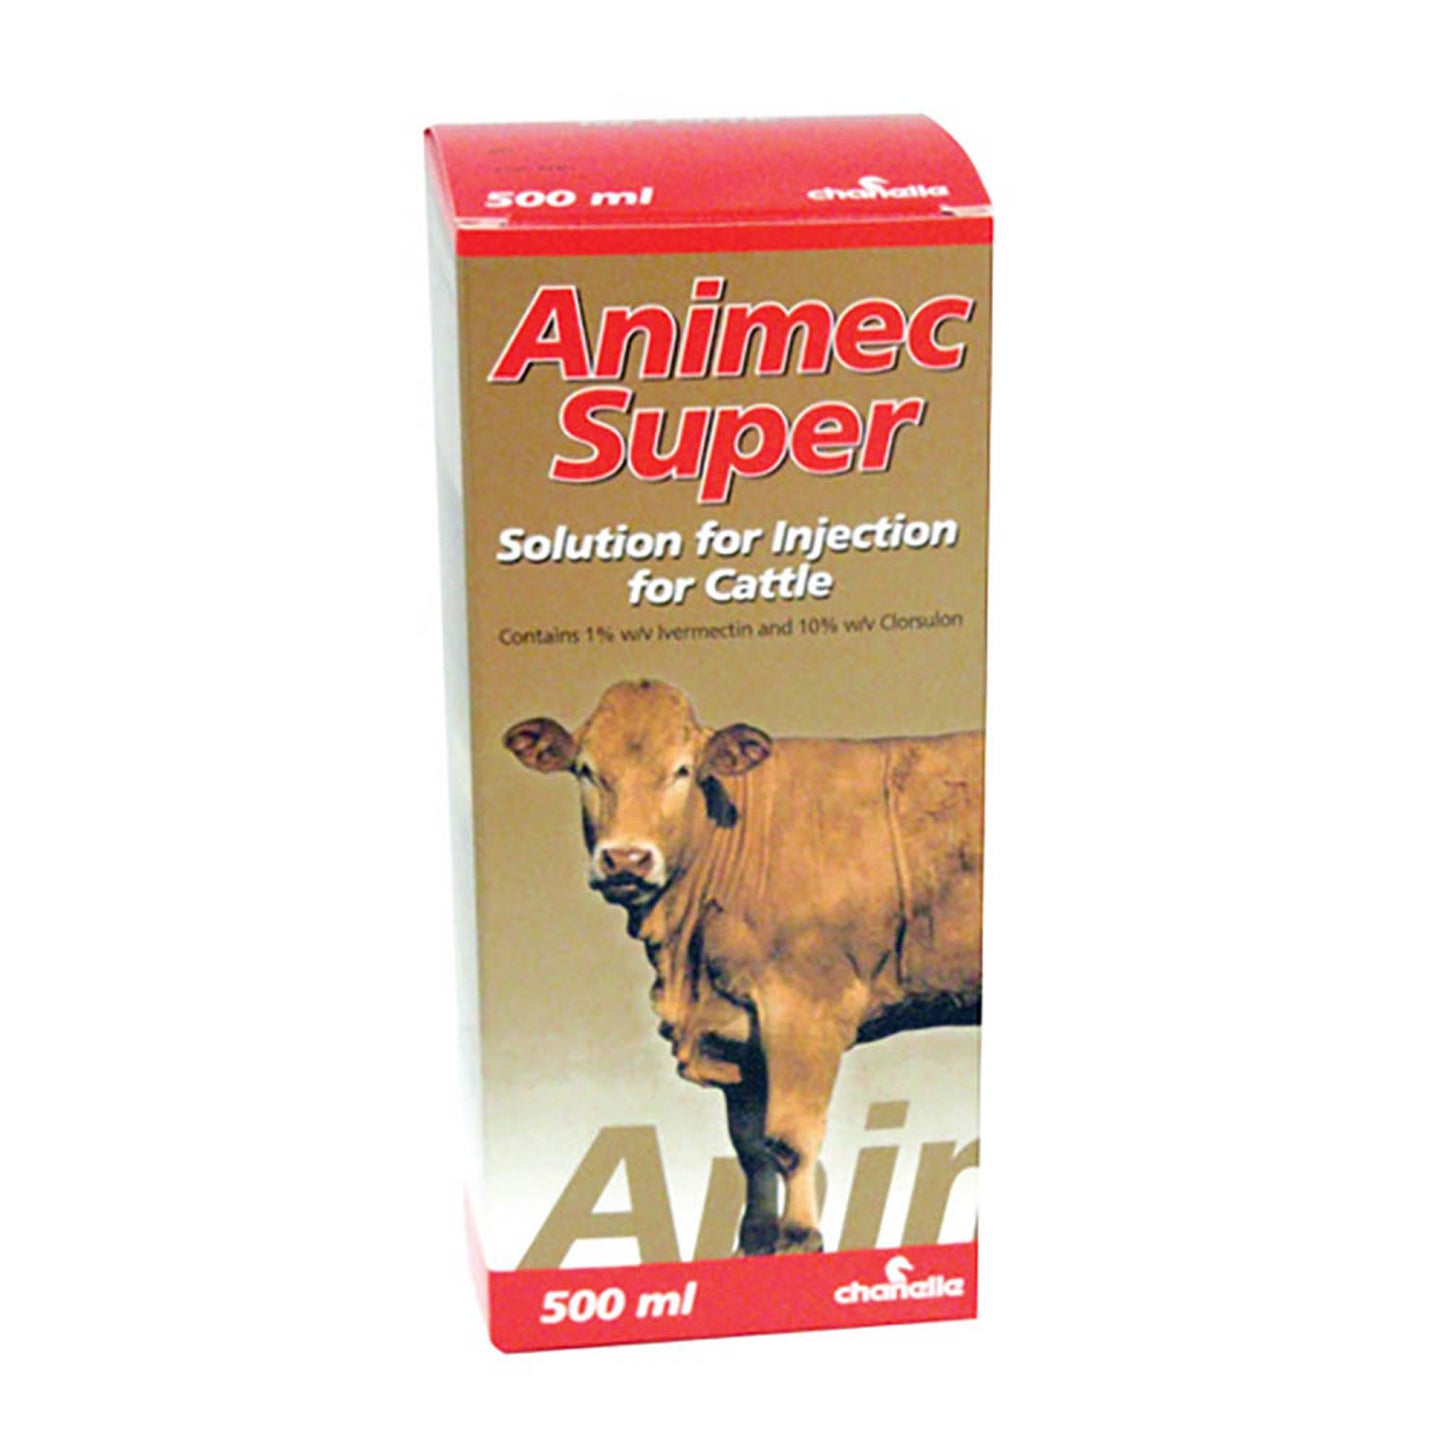 Animec Super Injection Solution for Injection for Cattle